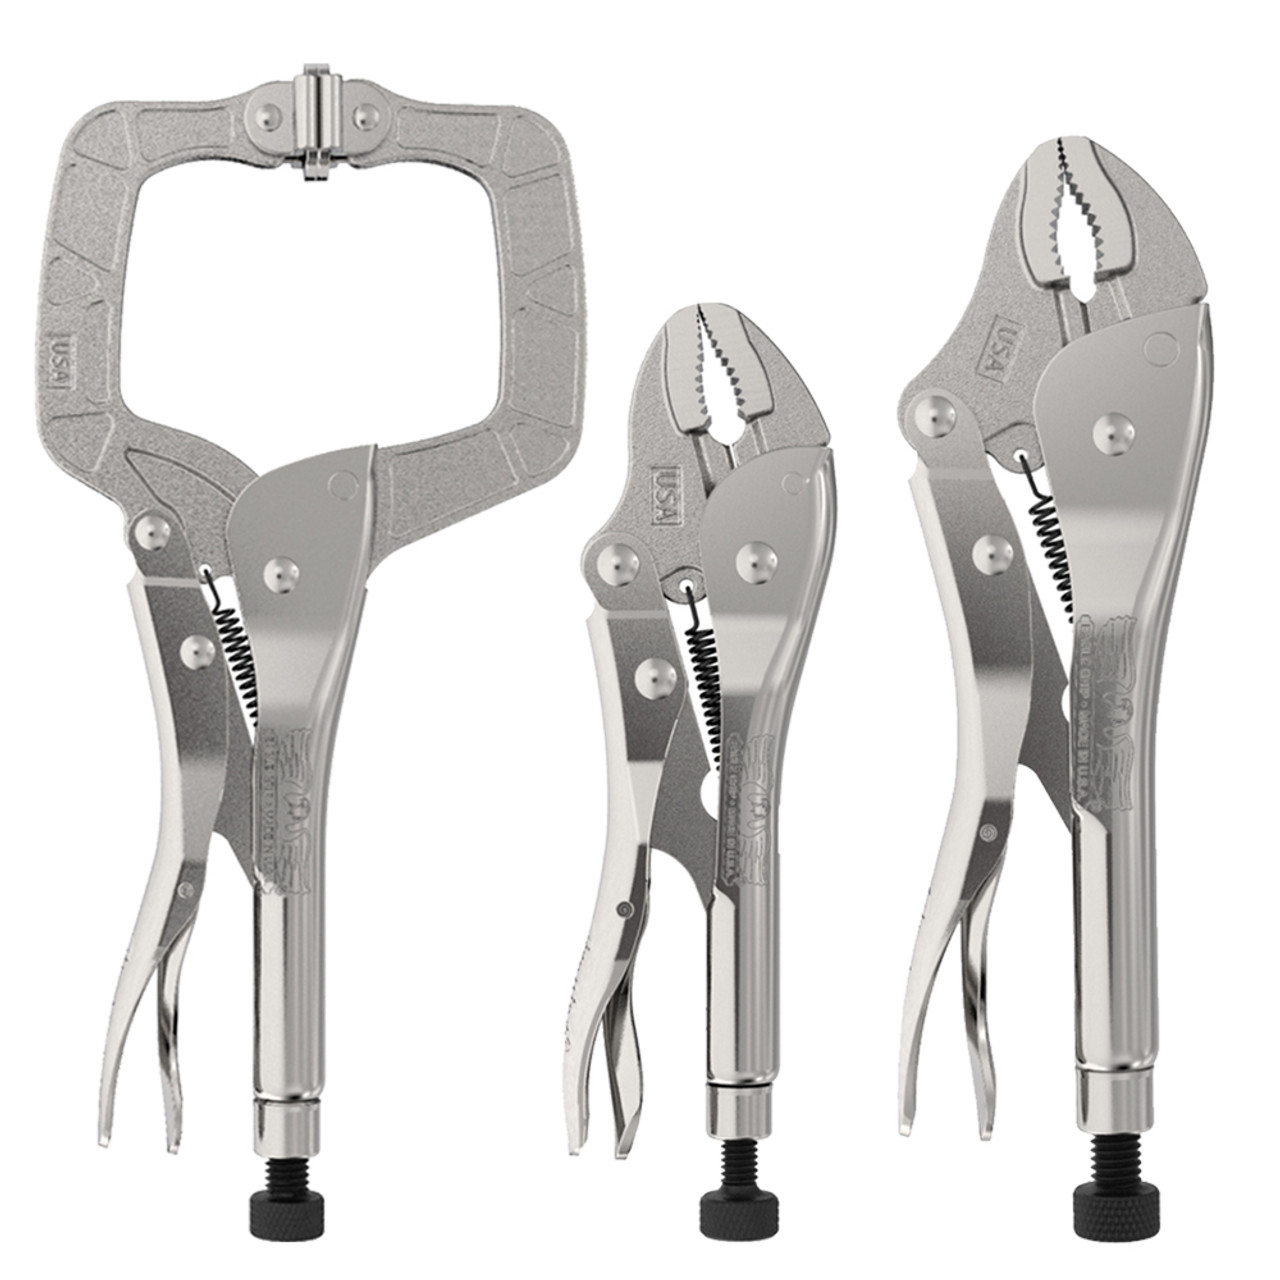 Malco Eagle Grip Locking Plier Combo Pack - 7 and 10 Curved Jaw plus 11  C-Clamp